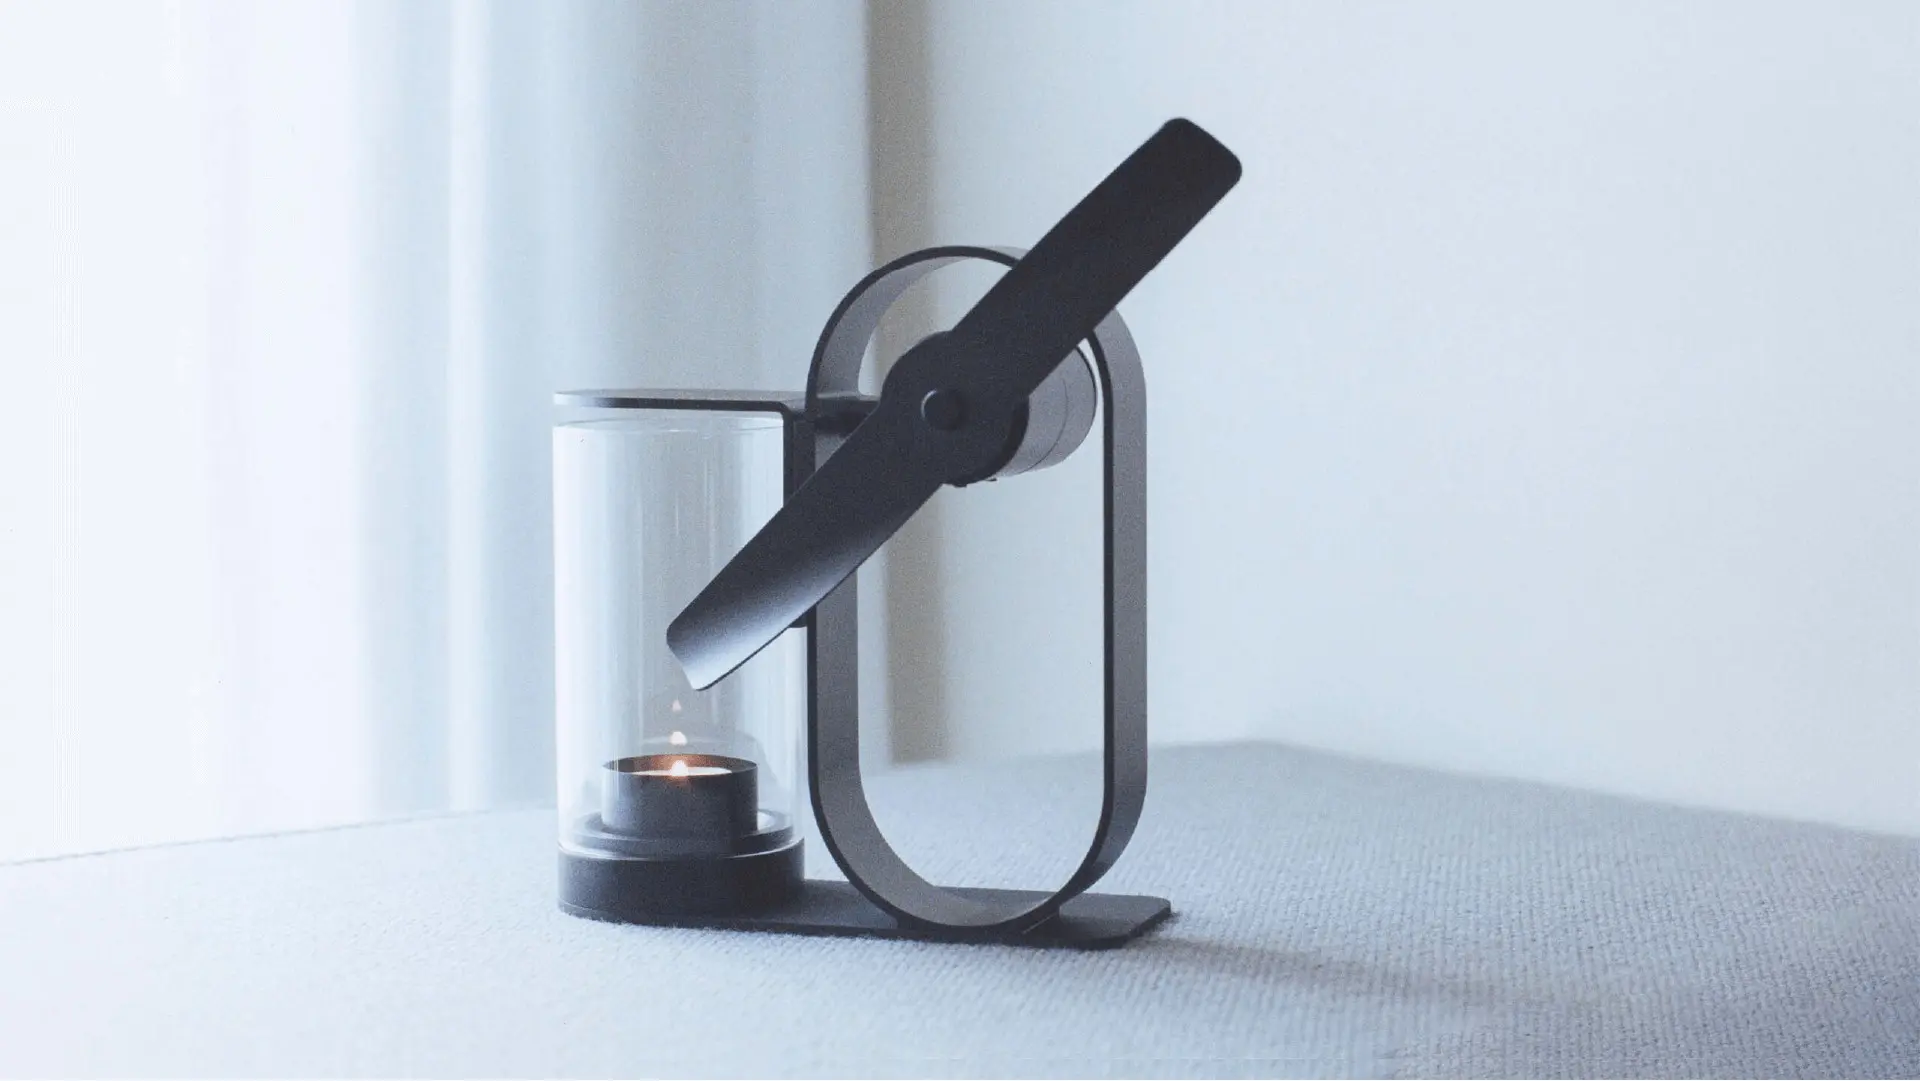 Lei aroma diffuser is self-sufficient and non-electric, powered by a candle